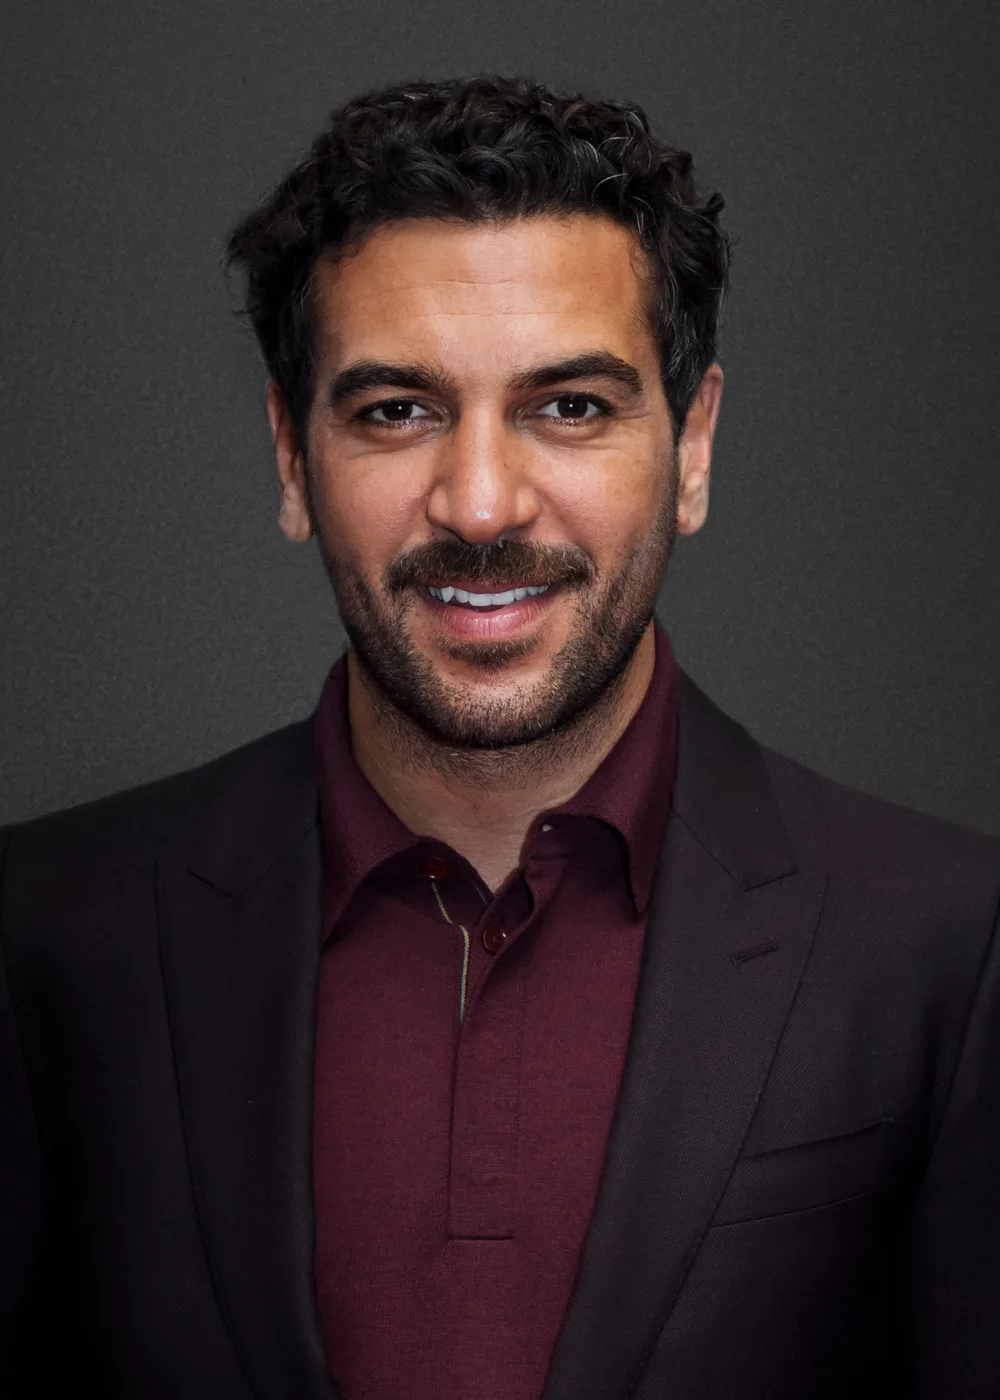 Elyas M'Barek is a German-Austrian actor known for his roles in German-language films and TV shows. He was born on May 29, 1982, in Munich, Germany, to an Austrian mother and a Tunisian father. M'Barek began his acting career in 2001 with a small role in the German TV series 